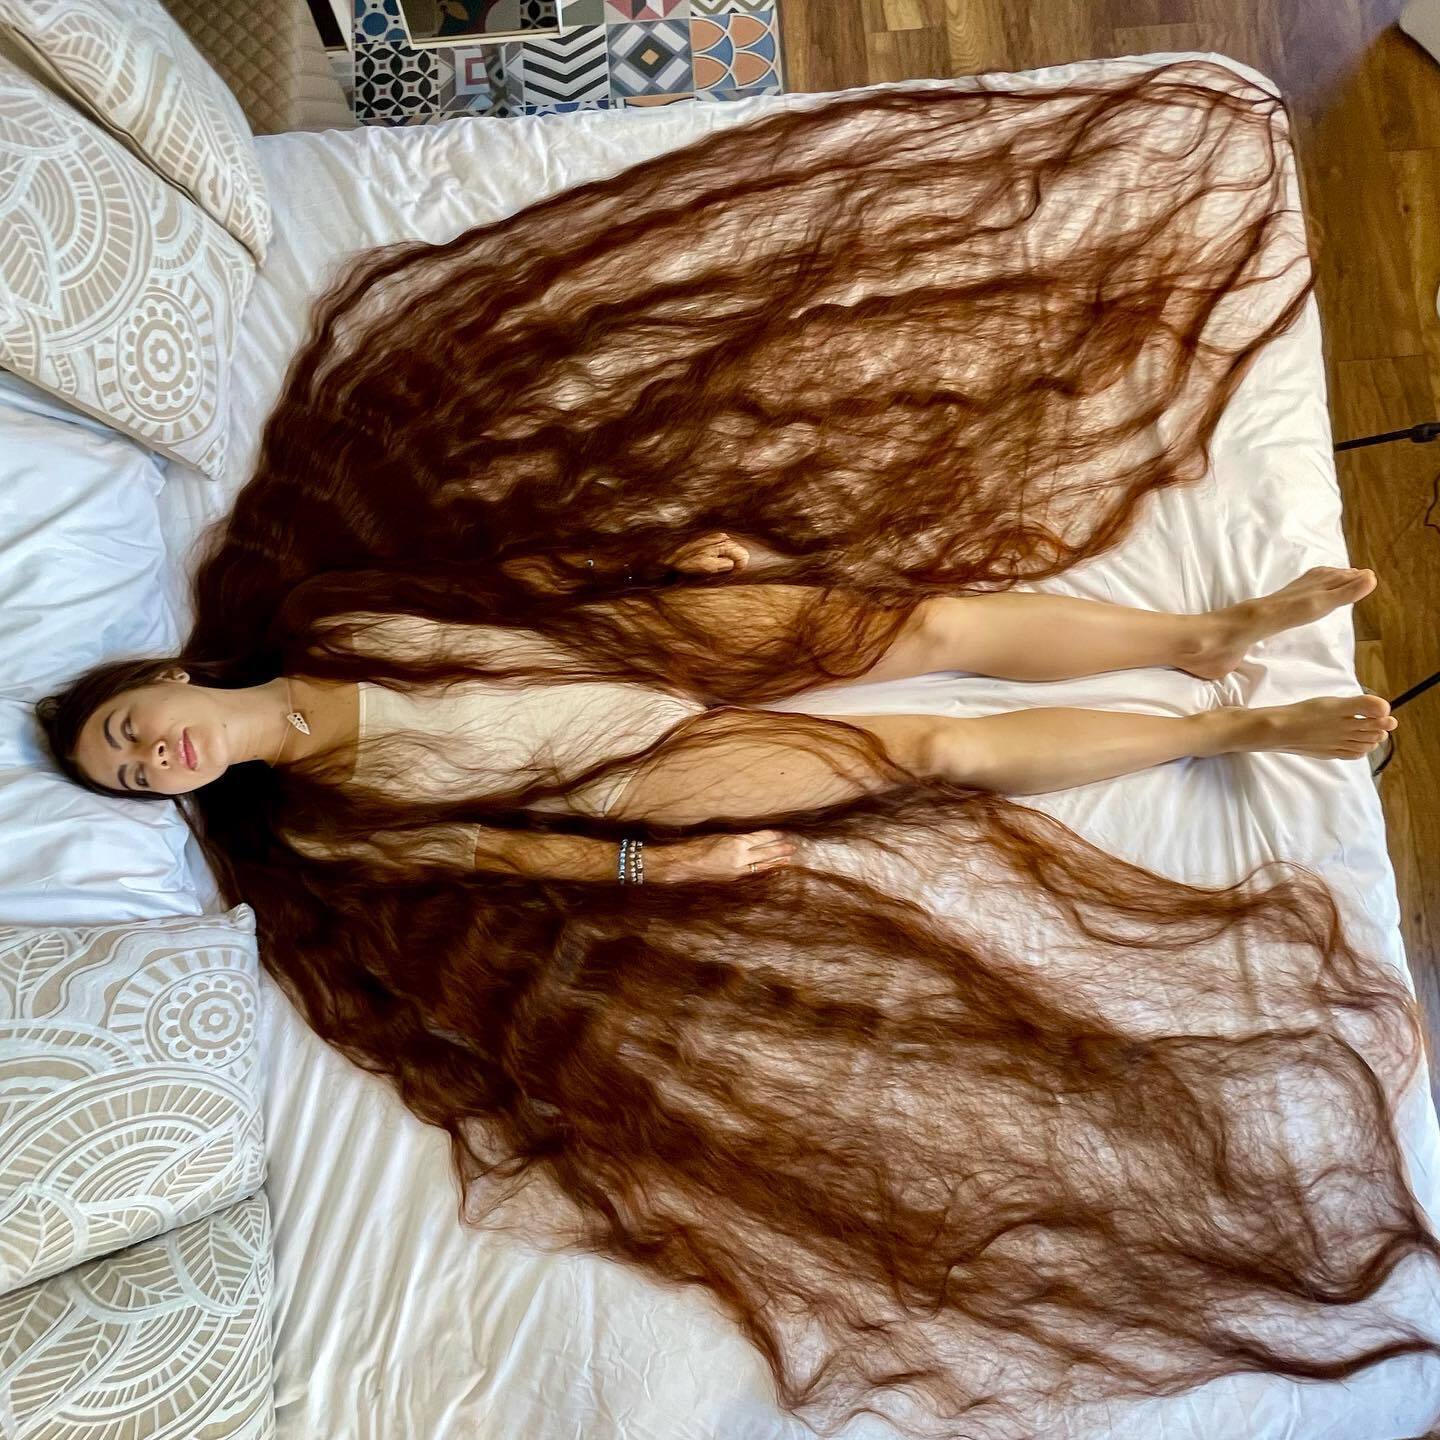 A Ukrainian woman entered the Guinness Book of World Records as the owner of the world's longest hair: what does Rapunzel Aliya Nasirova look like?